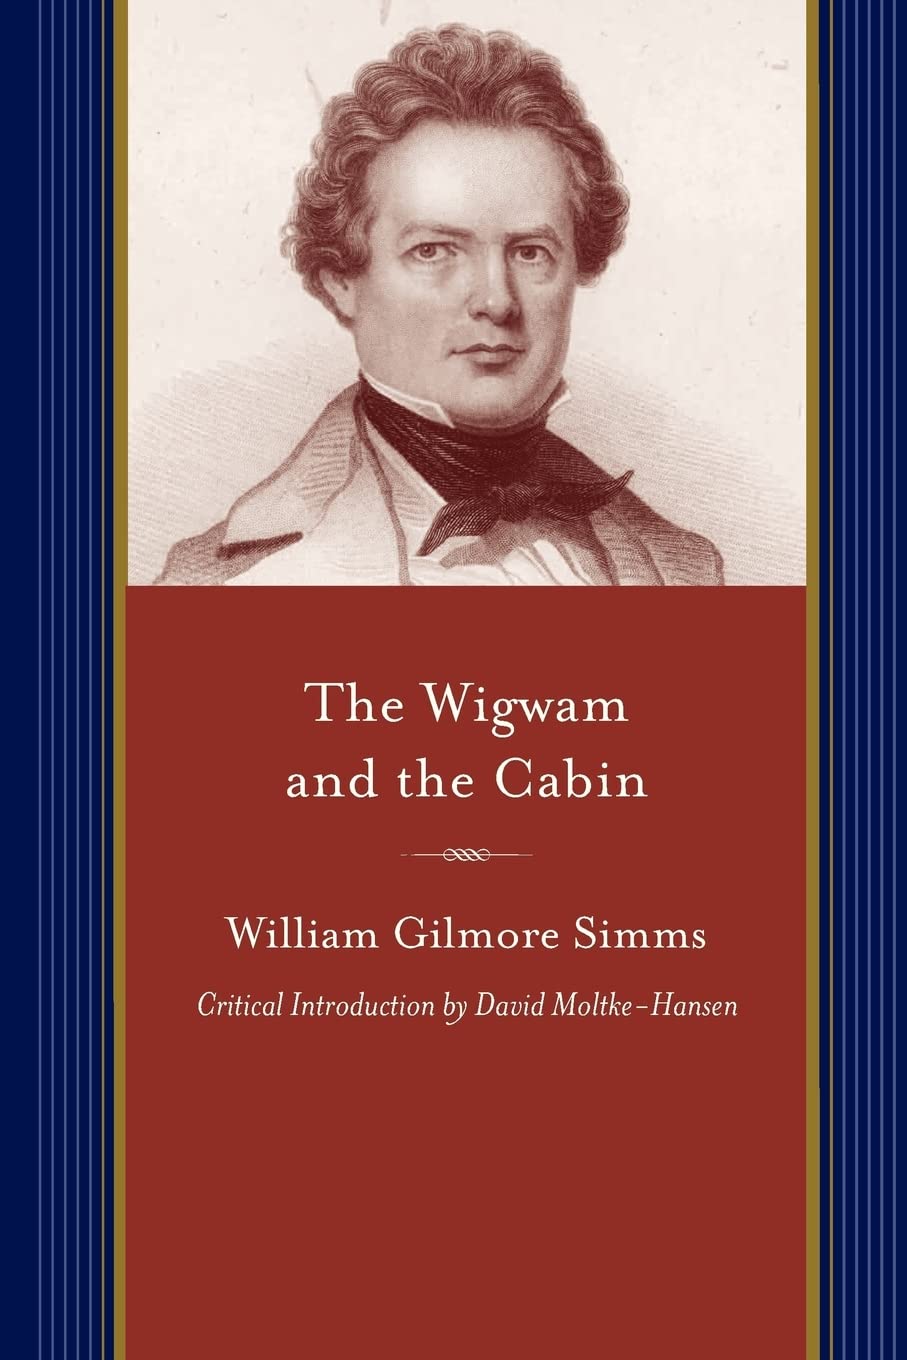 Wigwam and the Cabin (Simms - paperback)